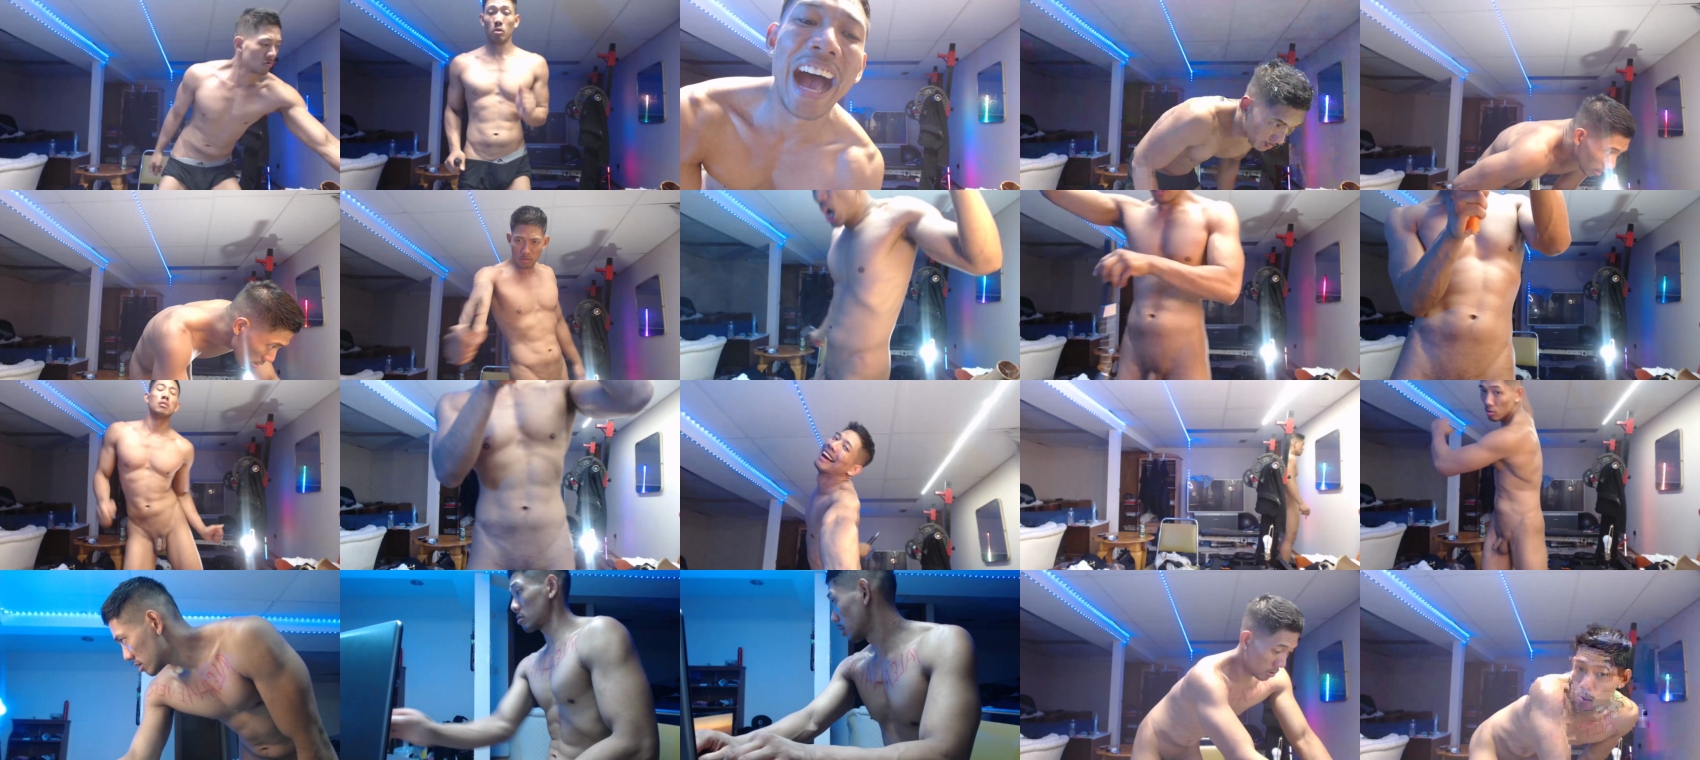 chadclouds  06-08-2022 Males jerking